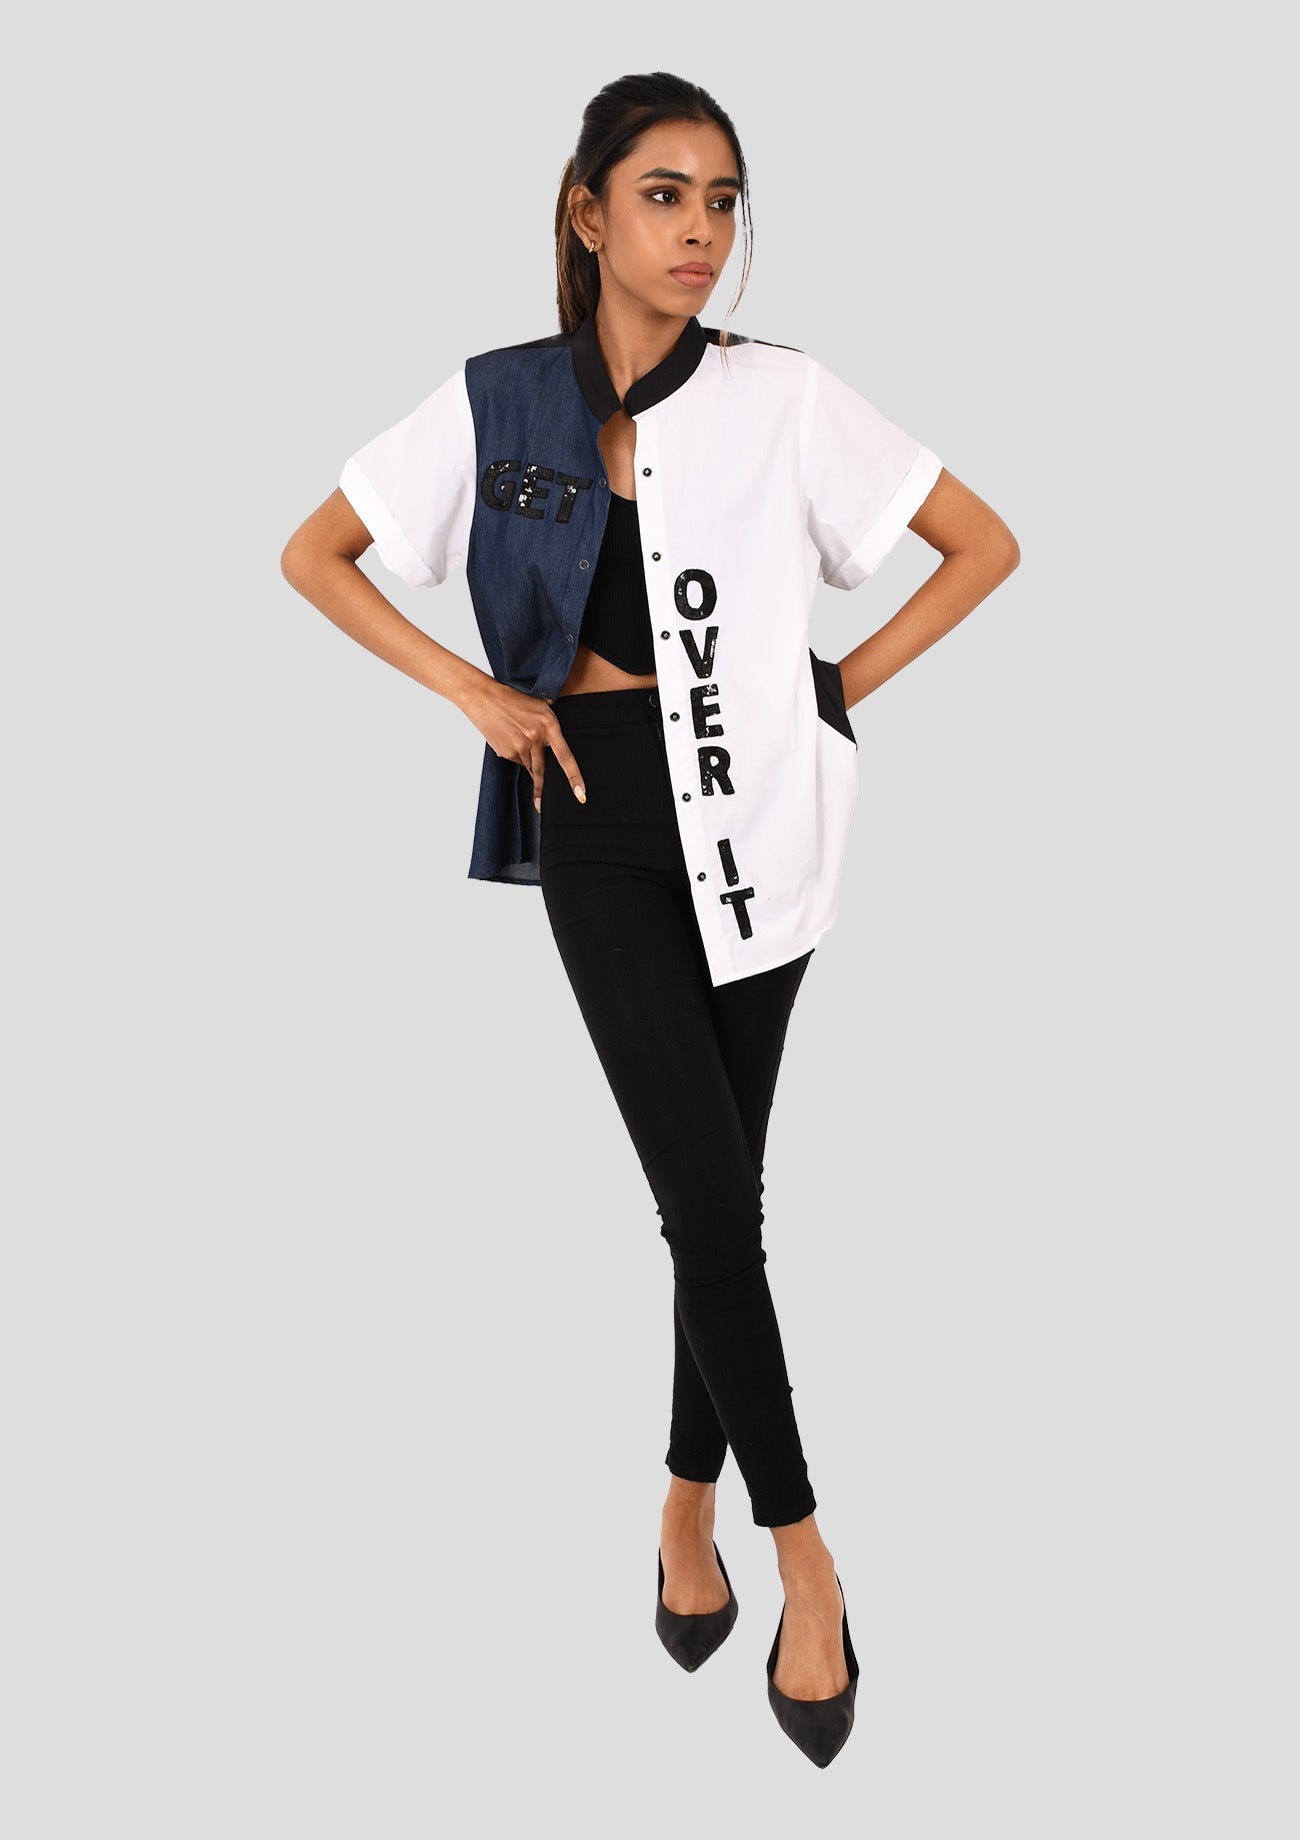 Combo White Cotton And Denim Shirt With Embroidered " Get Over It" Text